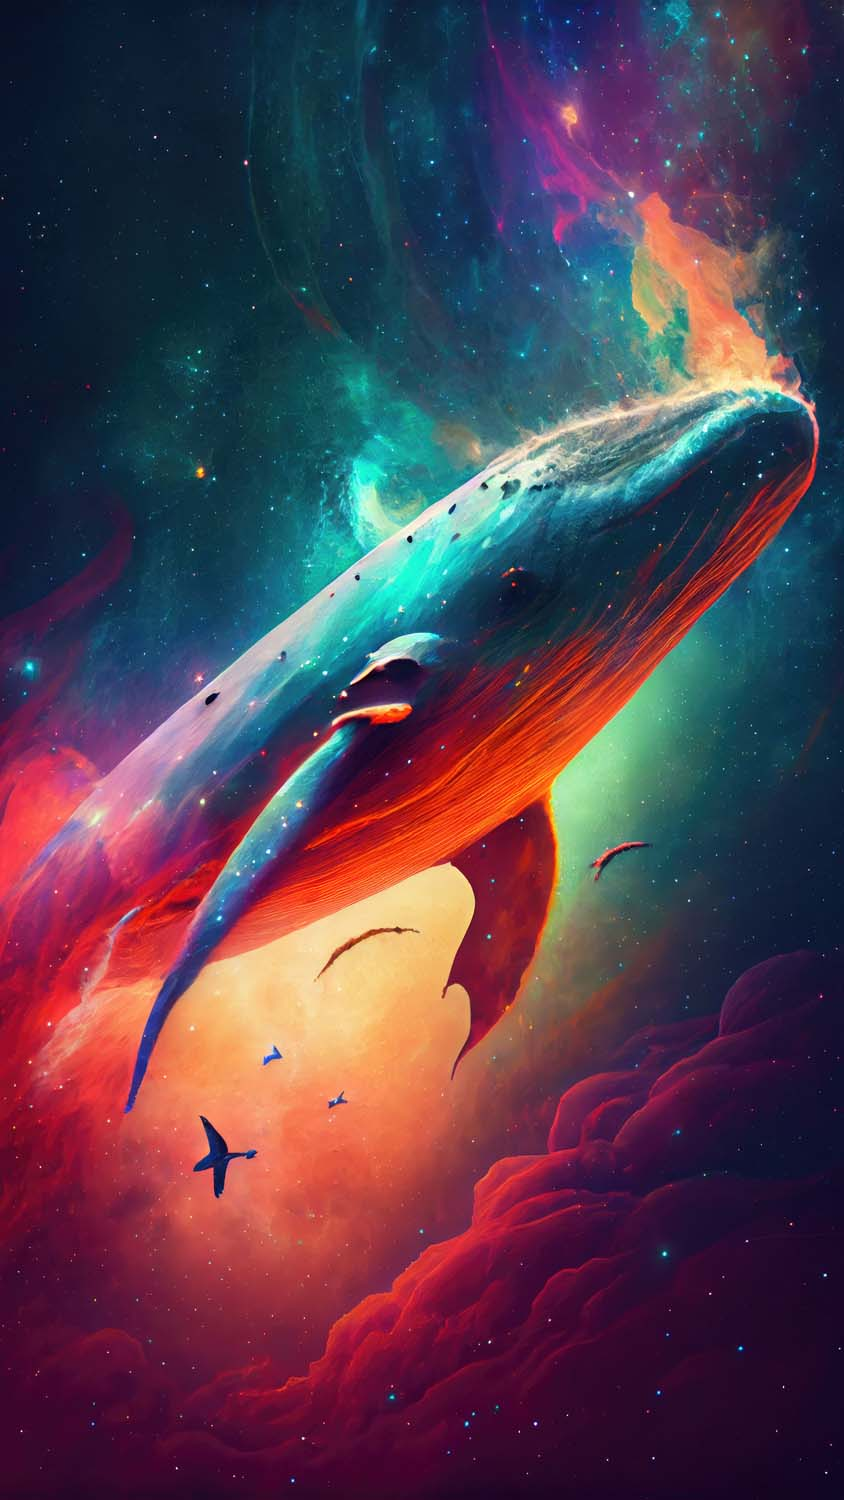 Space Whale IPhone Wallpaper HD  IPhone Wallpapers